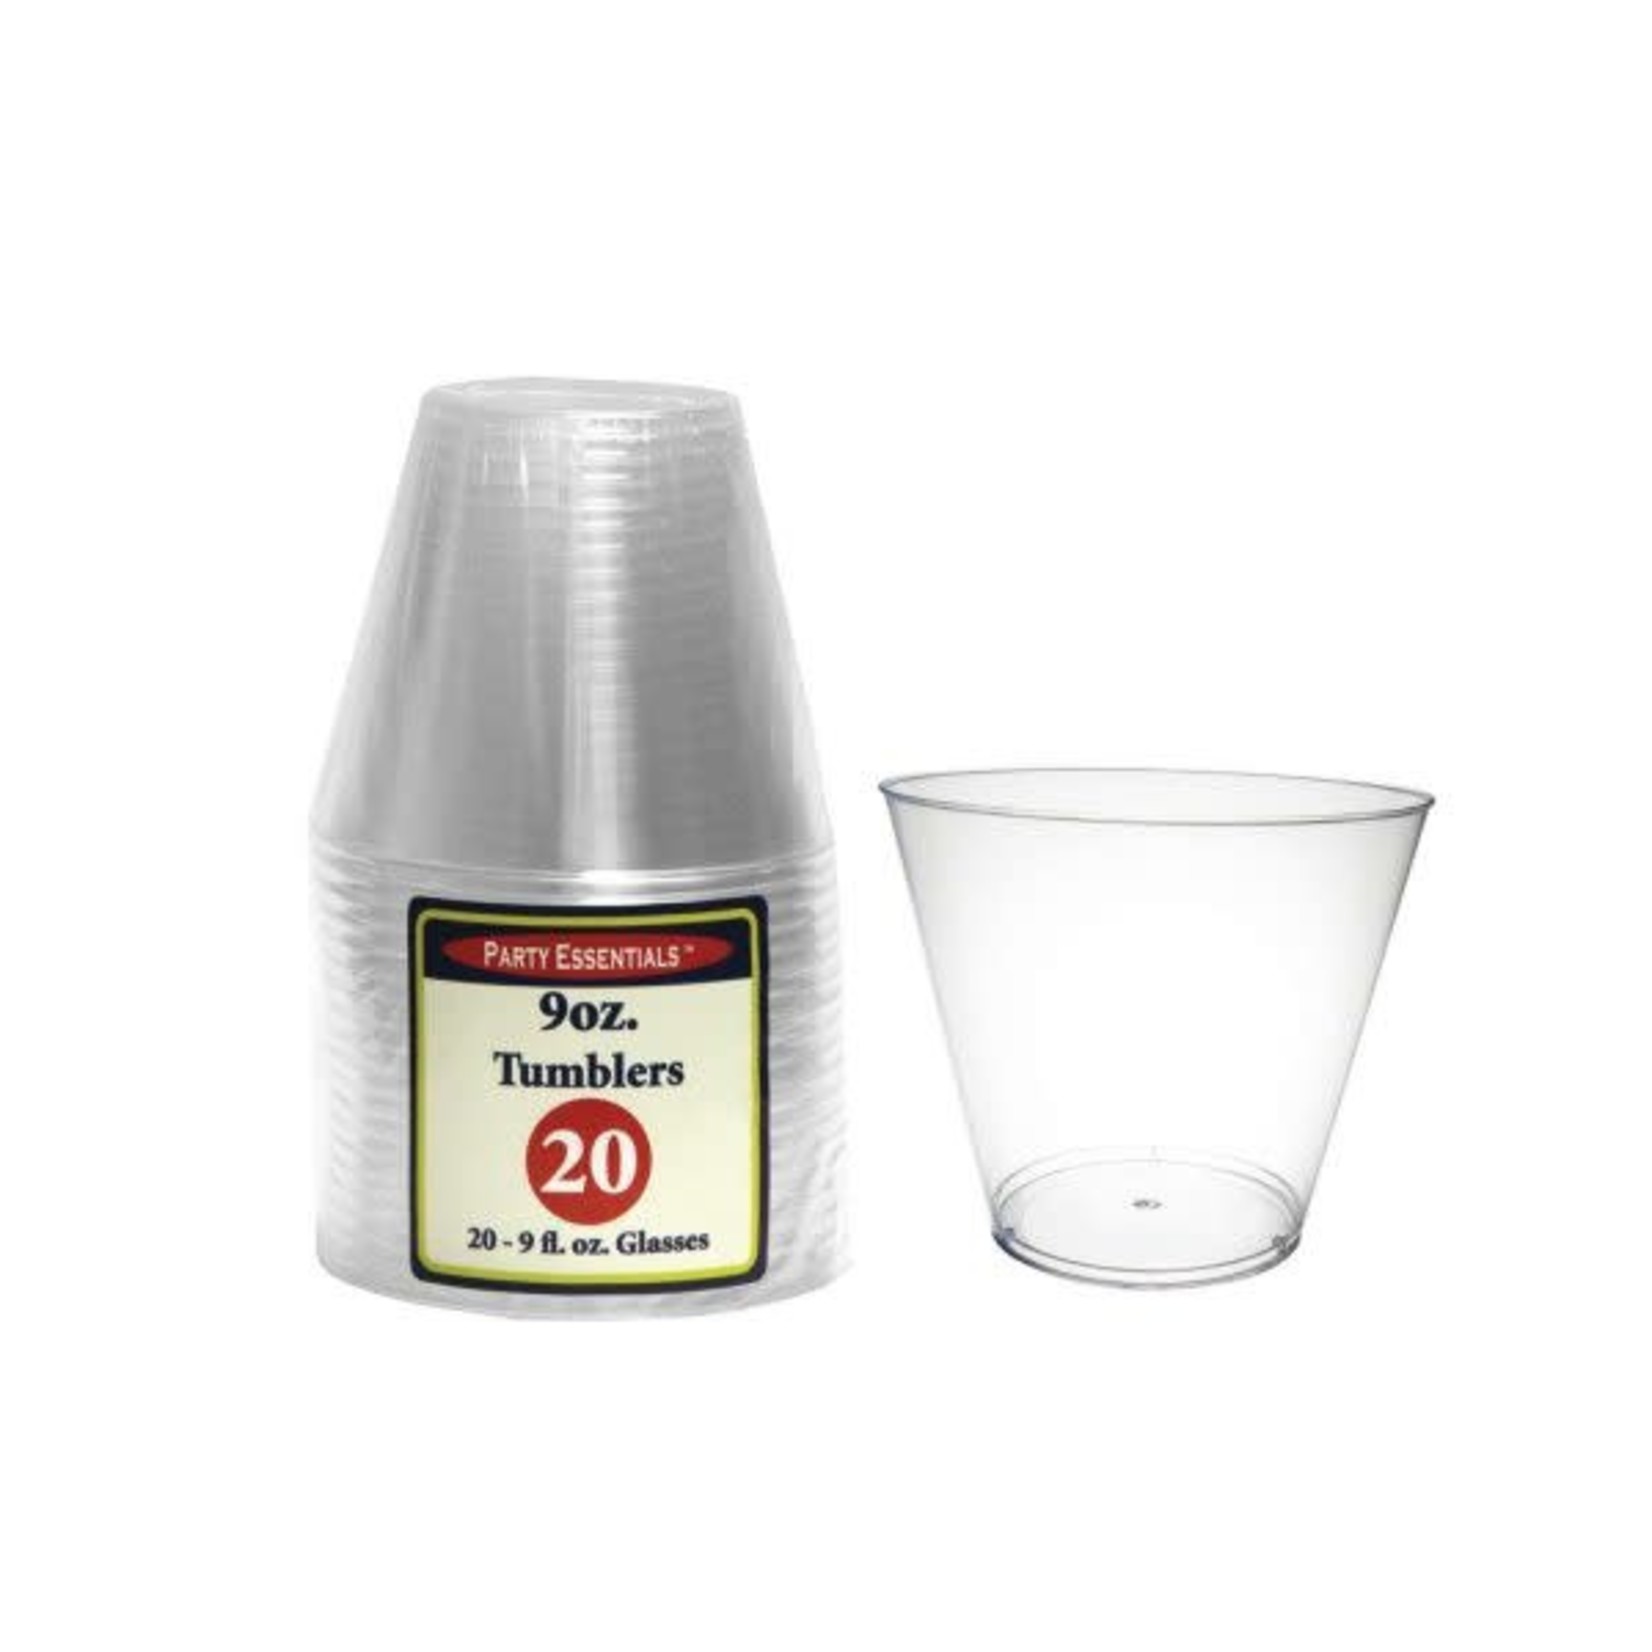 Party Essentials 9 oz. Tumblers - Clear 20 Ct.